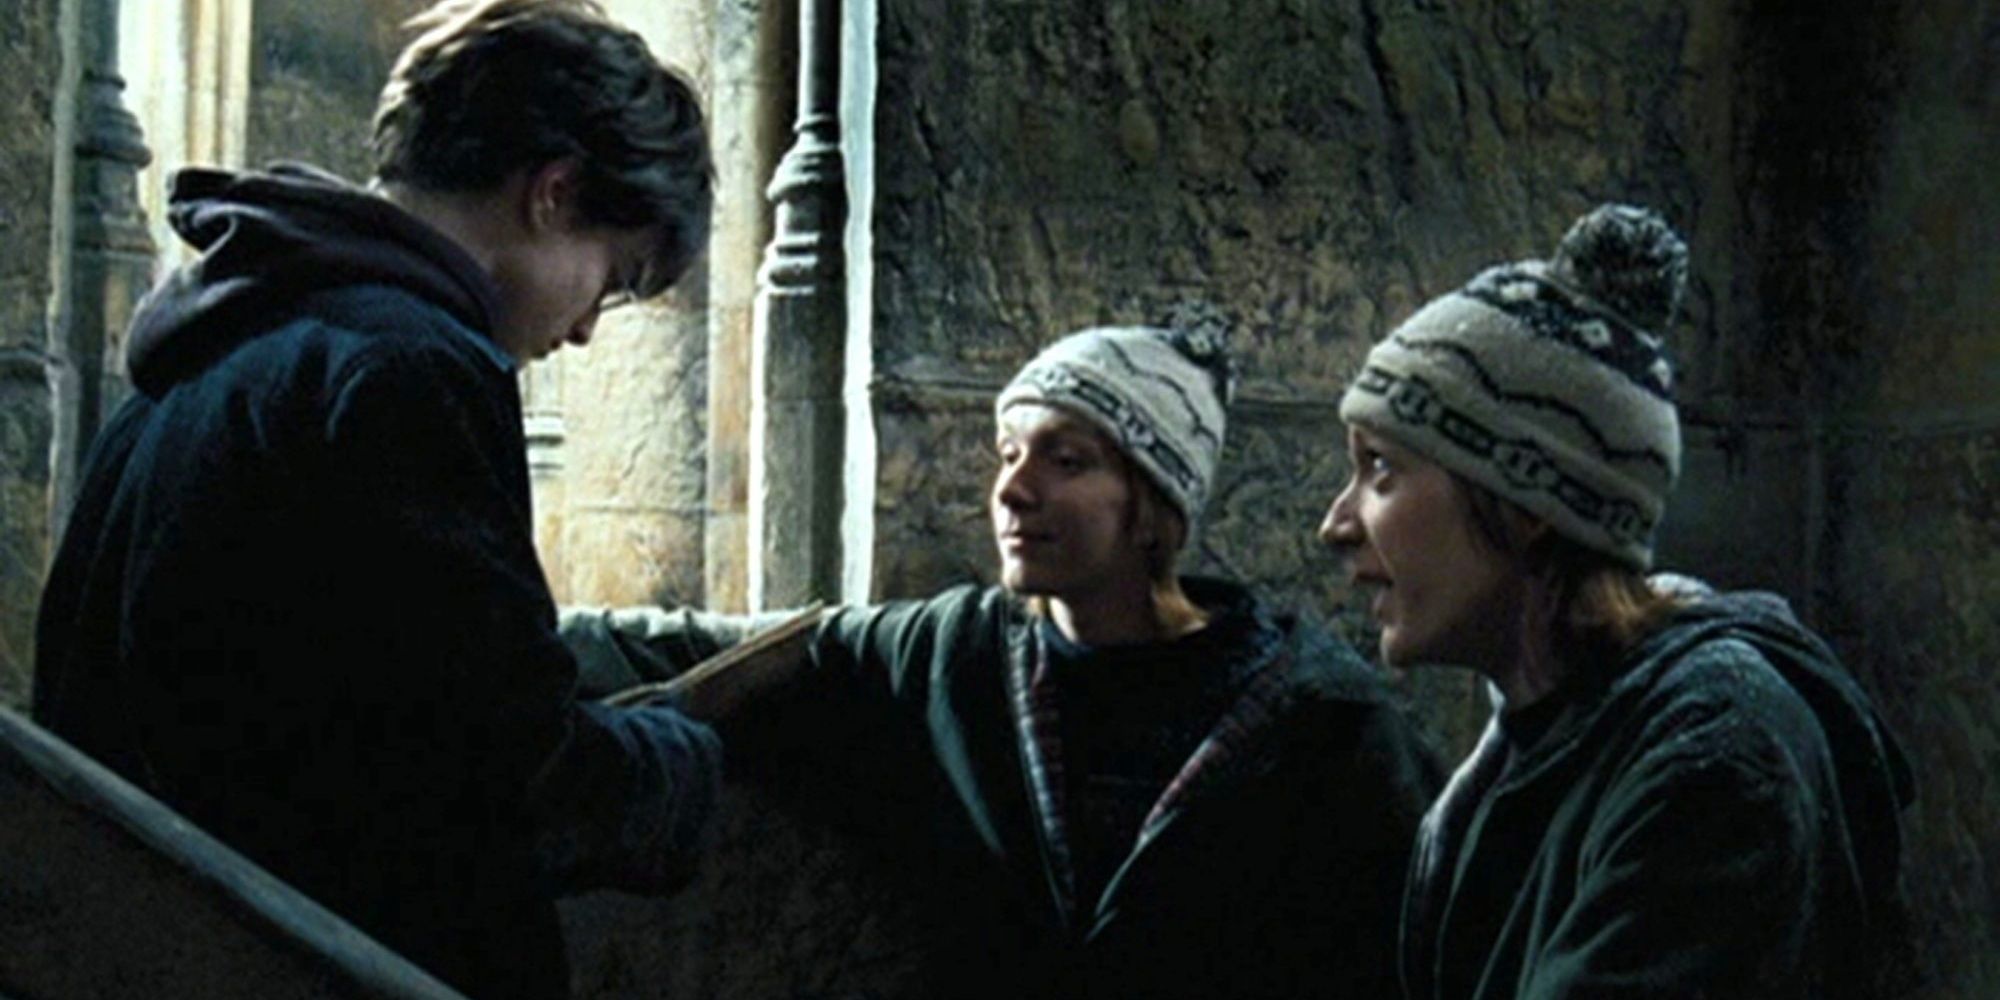 fred and george weasley give the marauders map to harry in prisoner of azkaban